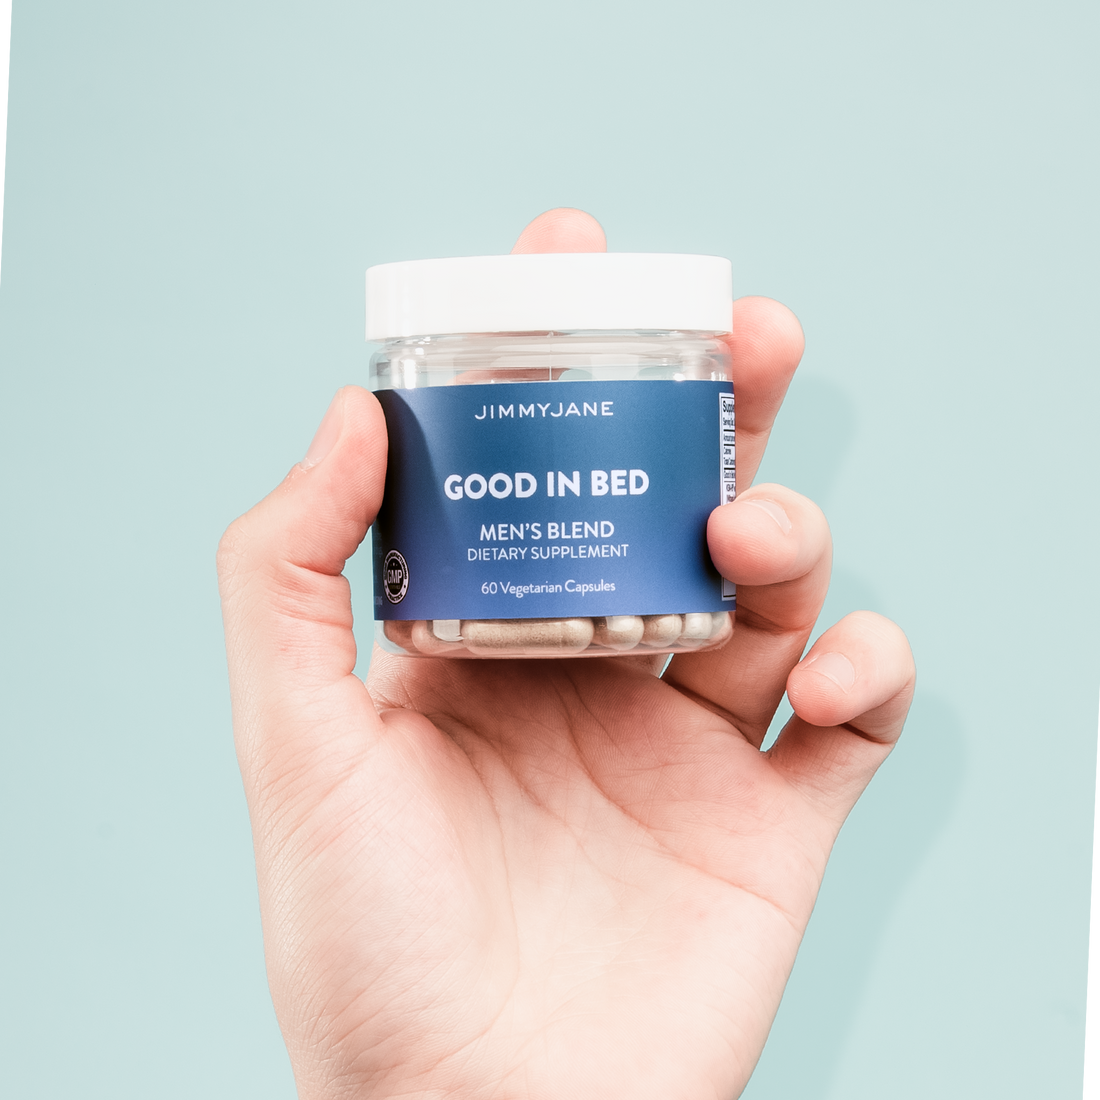 Jar of Good In Bed Men's Blend Dietary Supplements on blue background in a man's hand